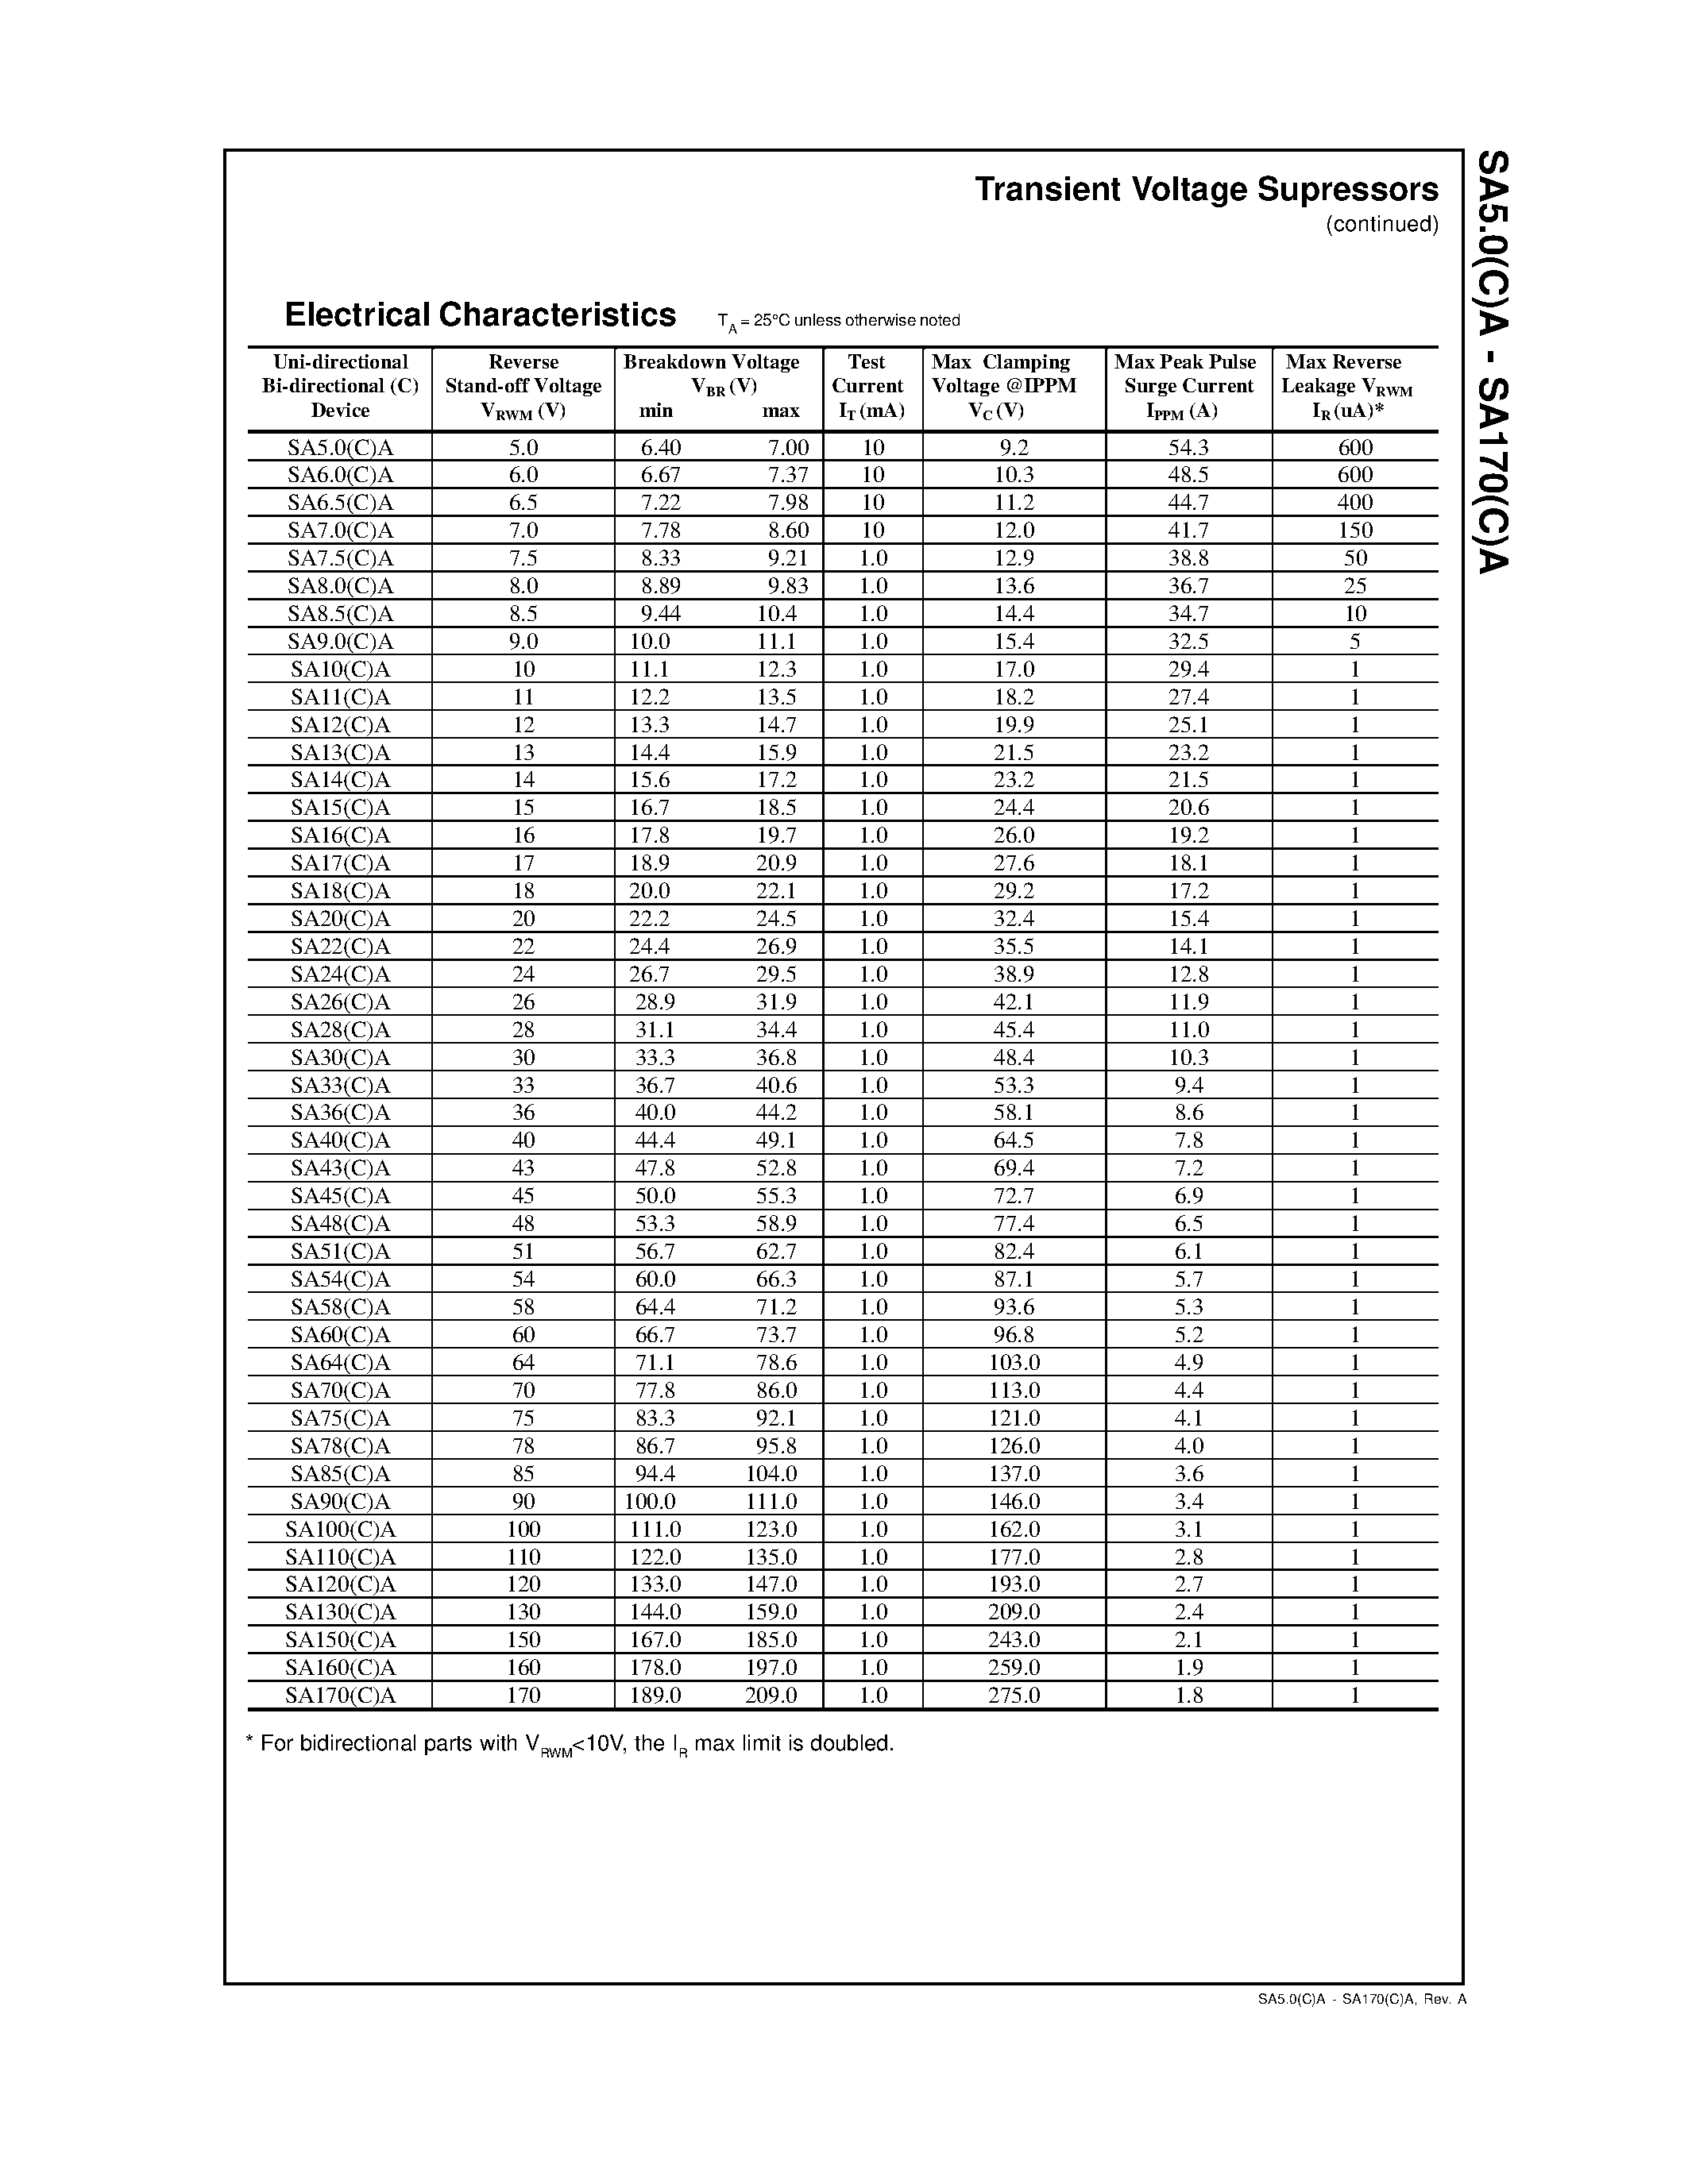 Datasheet SA100(C)A - DEVICES FOR BIPOLAR APPLICATIONS page 2